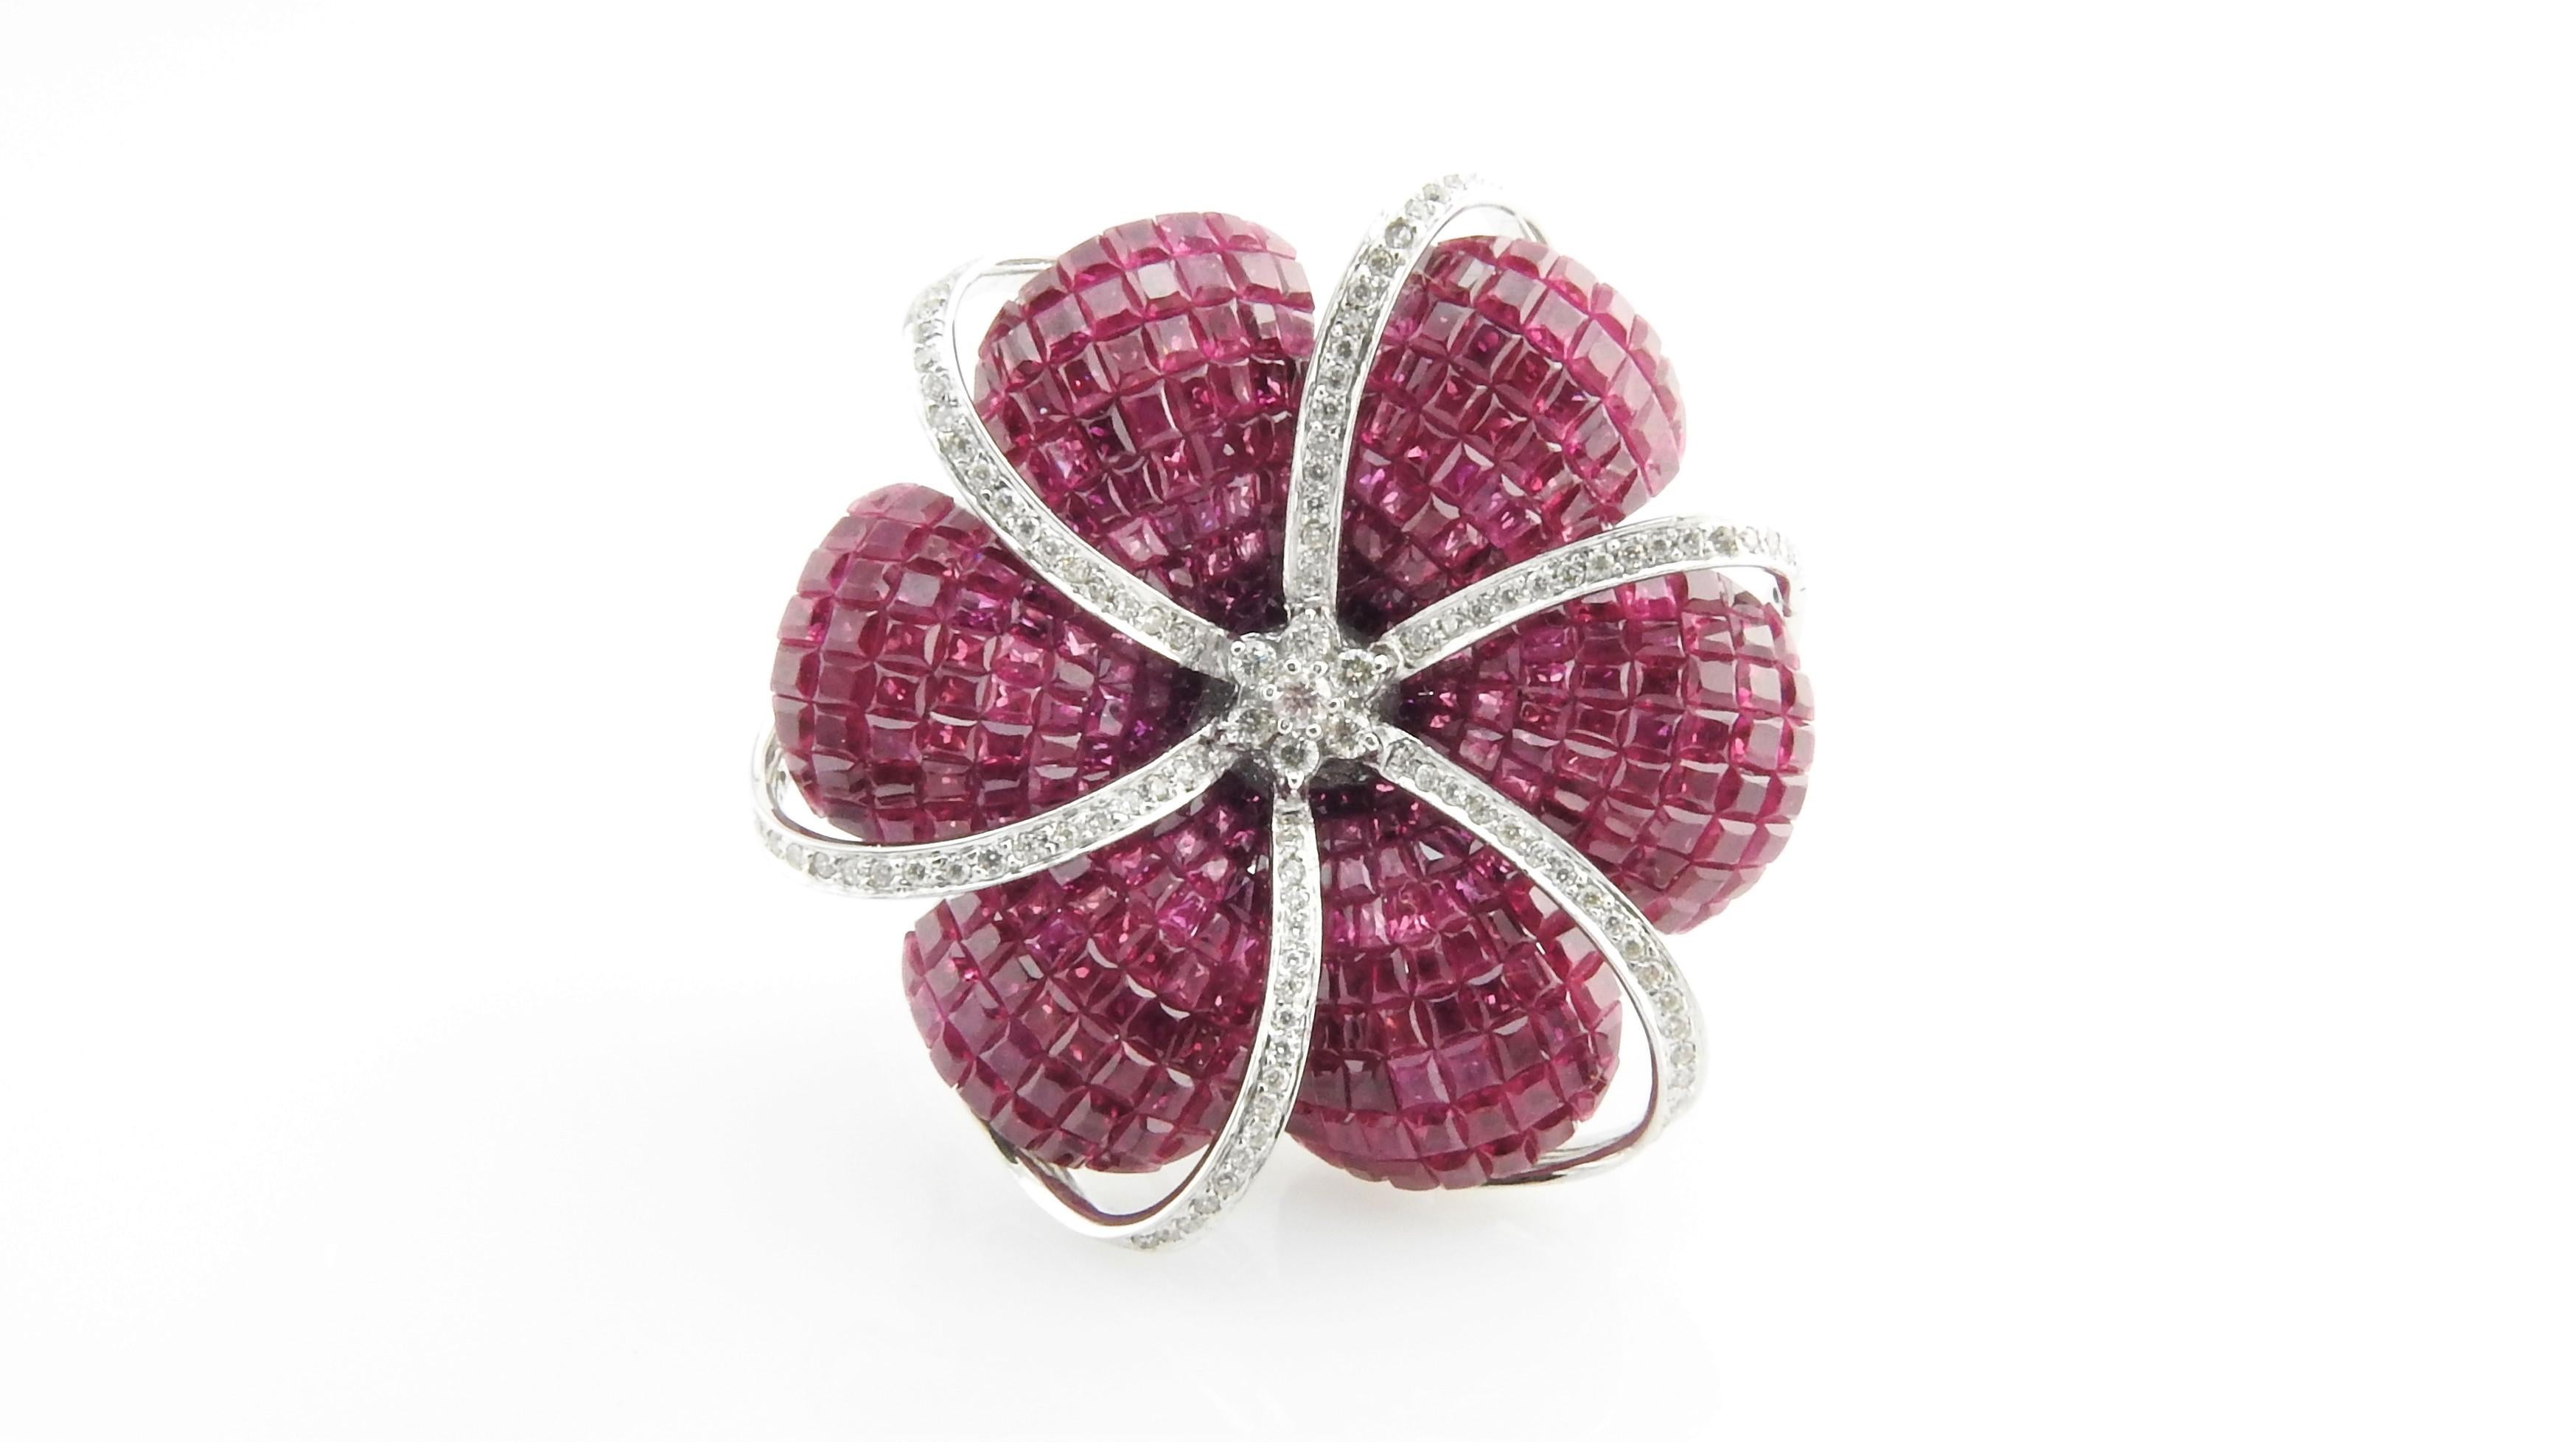 Invisible Set Genuine Ruby and Diamond Flower Brooch / Pendant

This lovely floral piece can be worn as a brooch or a pendant and is set in 18K White Gold.

It is invisible set with 324 genuine red rubies.

102 round brilliant diamonds total approx.